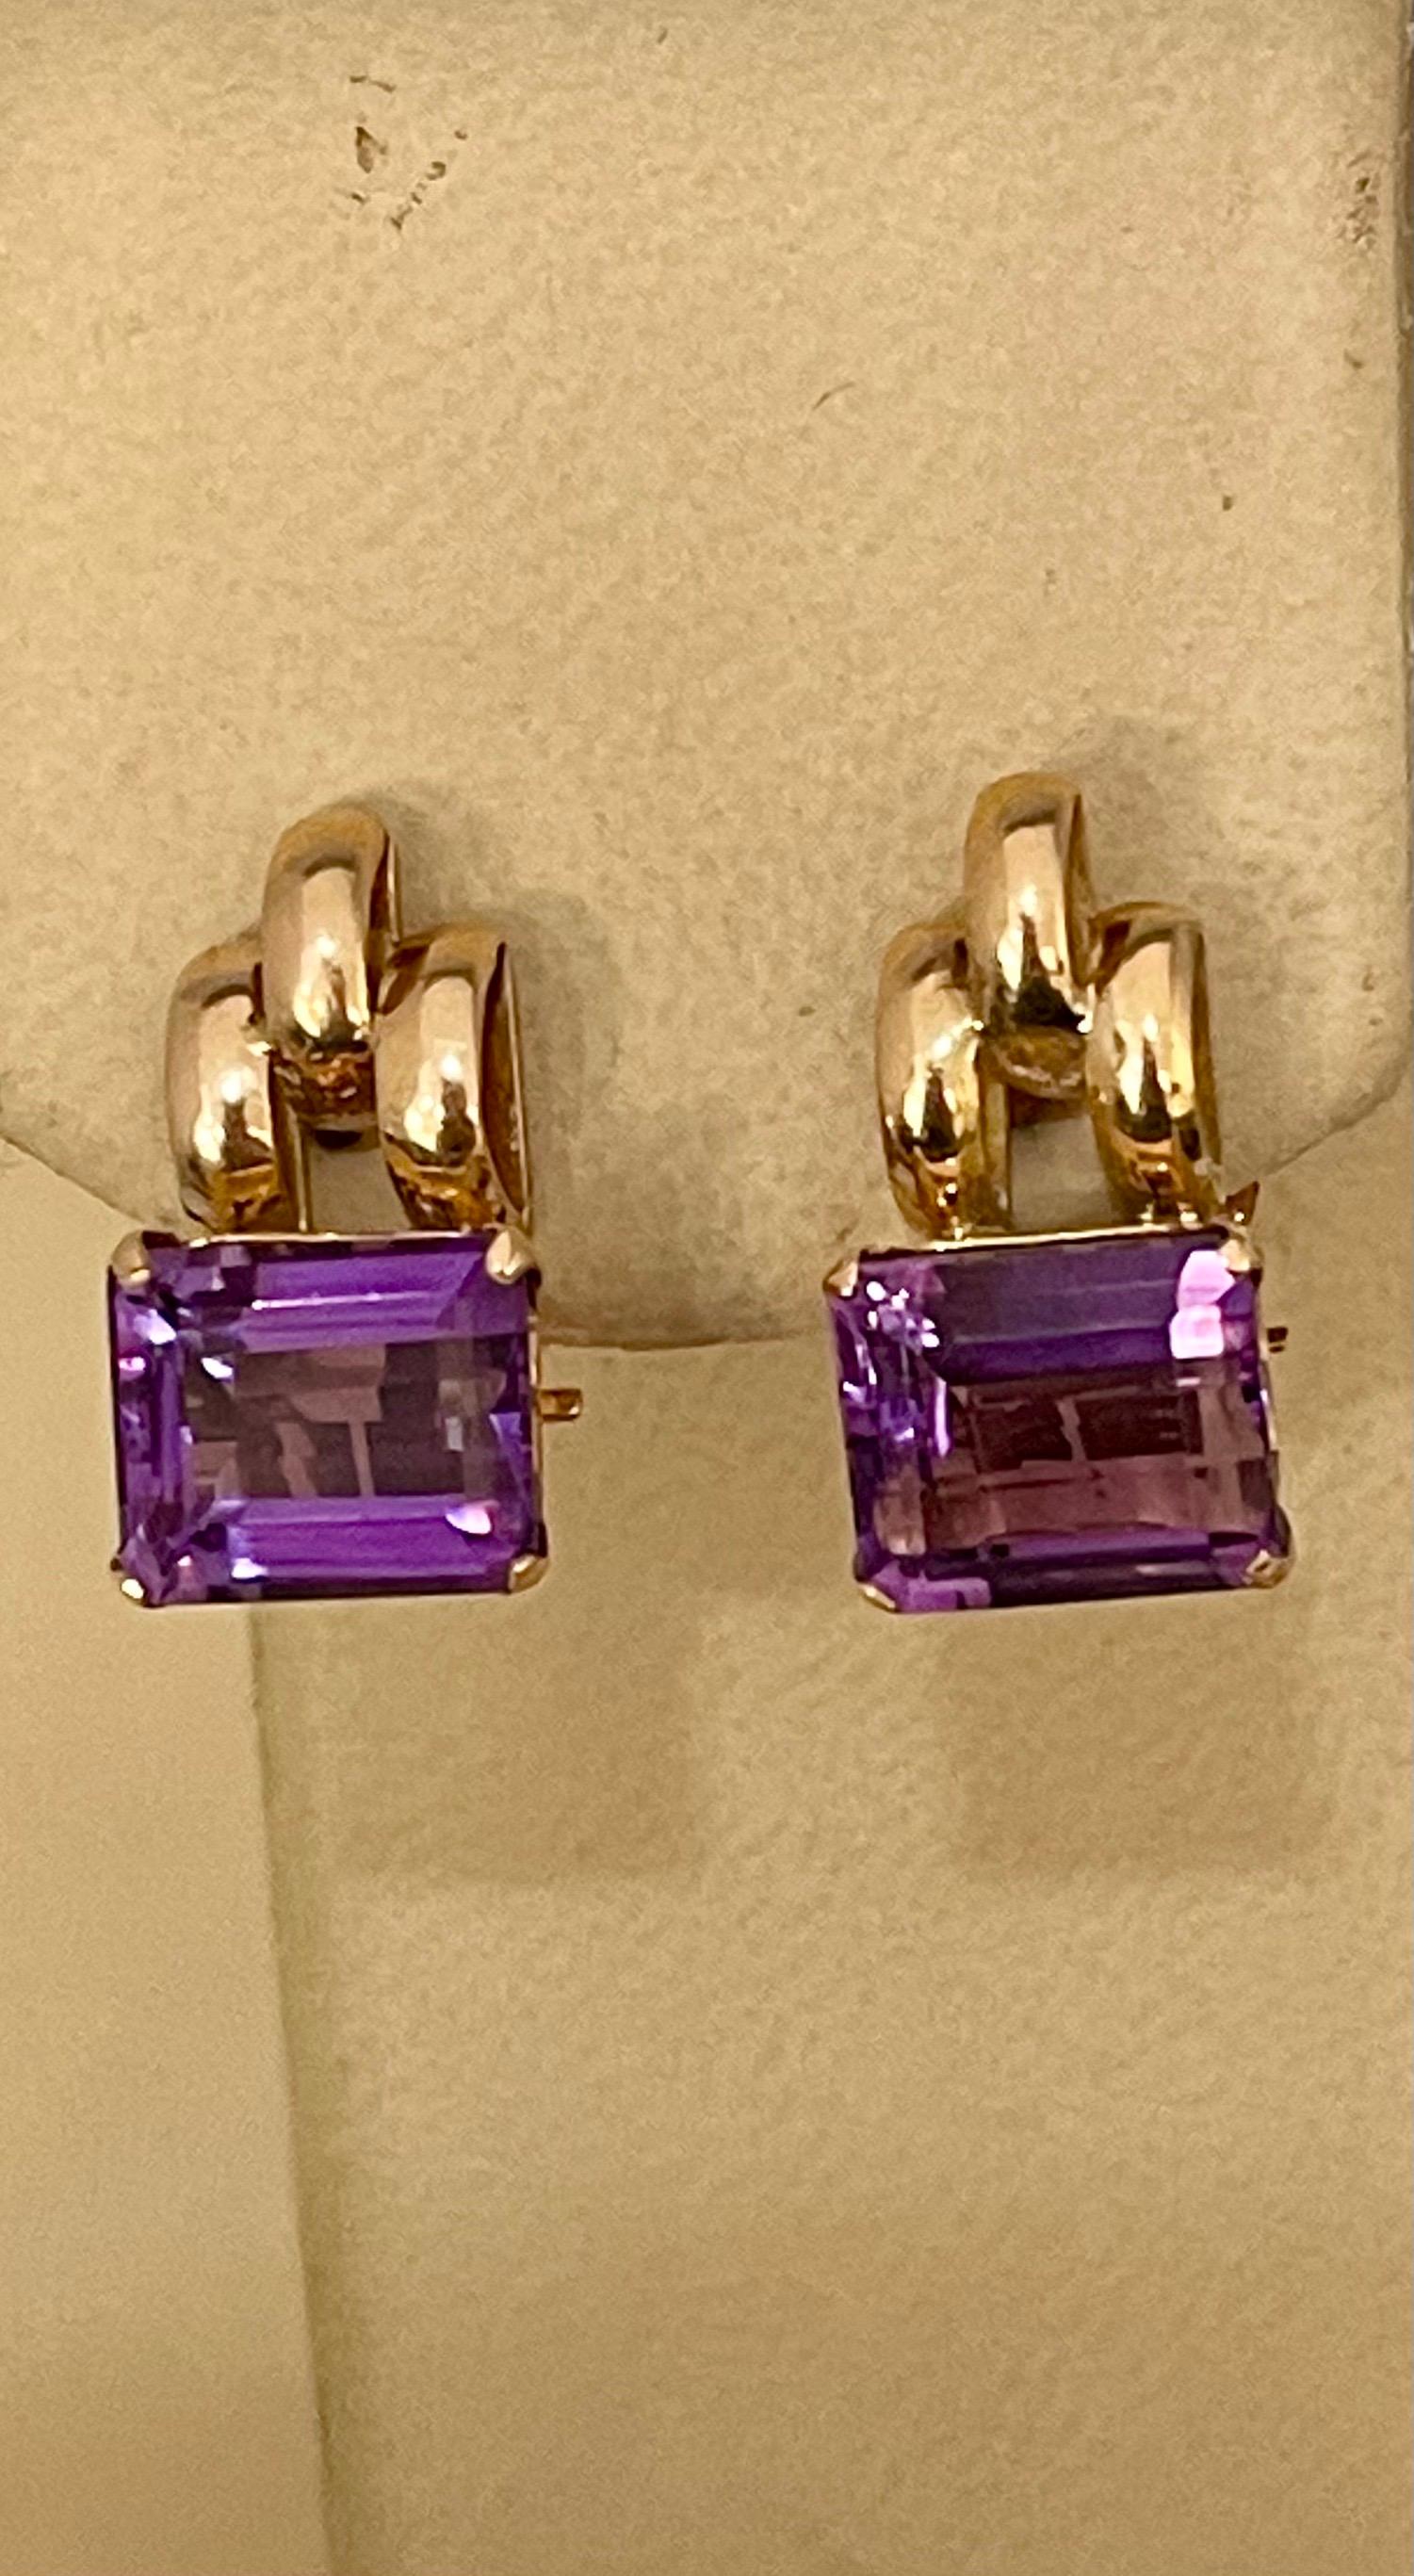 Approximately 6 Carat Emerald Cut Amethyst  14 Karat Yellow Gold Clip  Earrings
Beautiful pair of earrings  finely crafted in  14 Karat  solid Yellow gold.
Nice quality but color of amethyst  is light
perfect pair made in 14 Karat Yellow  gold
total